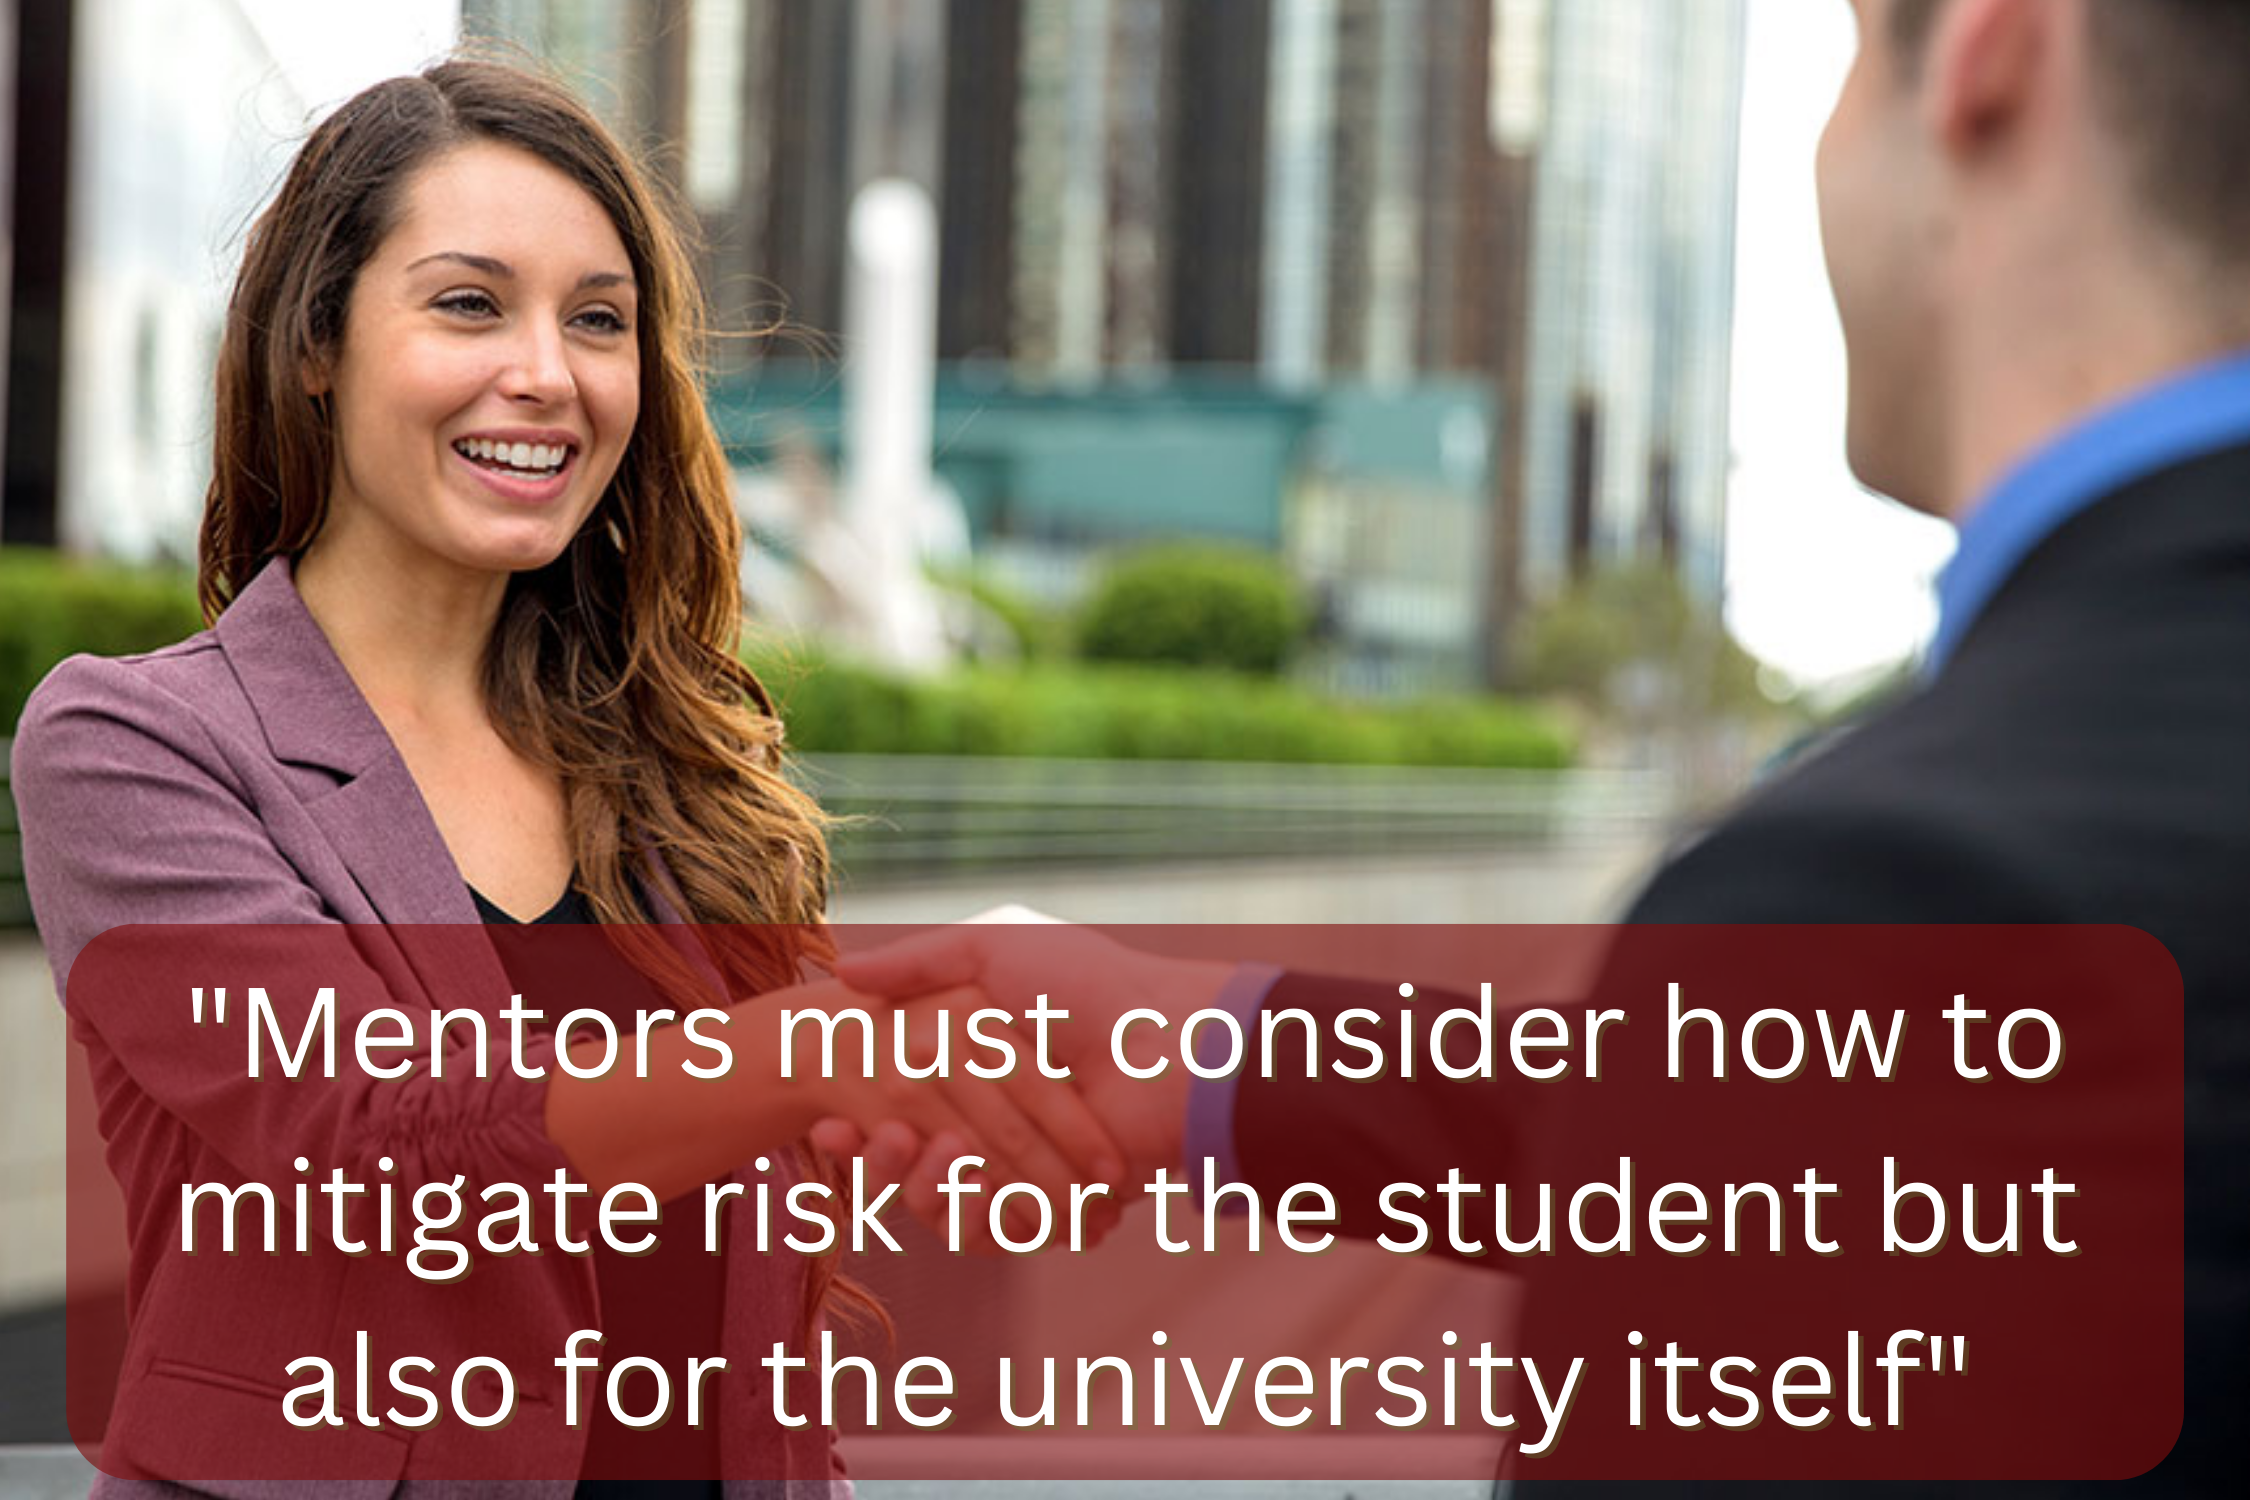 A woman and a man shake hands. Overlaying the image are the words, "Mentors must consider how to mitigate risk for the student but also for the university itself."